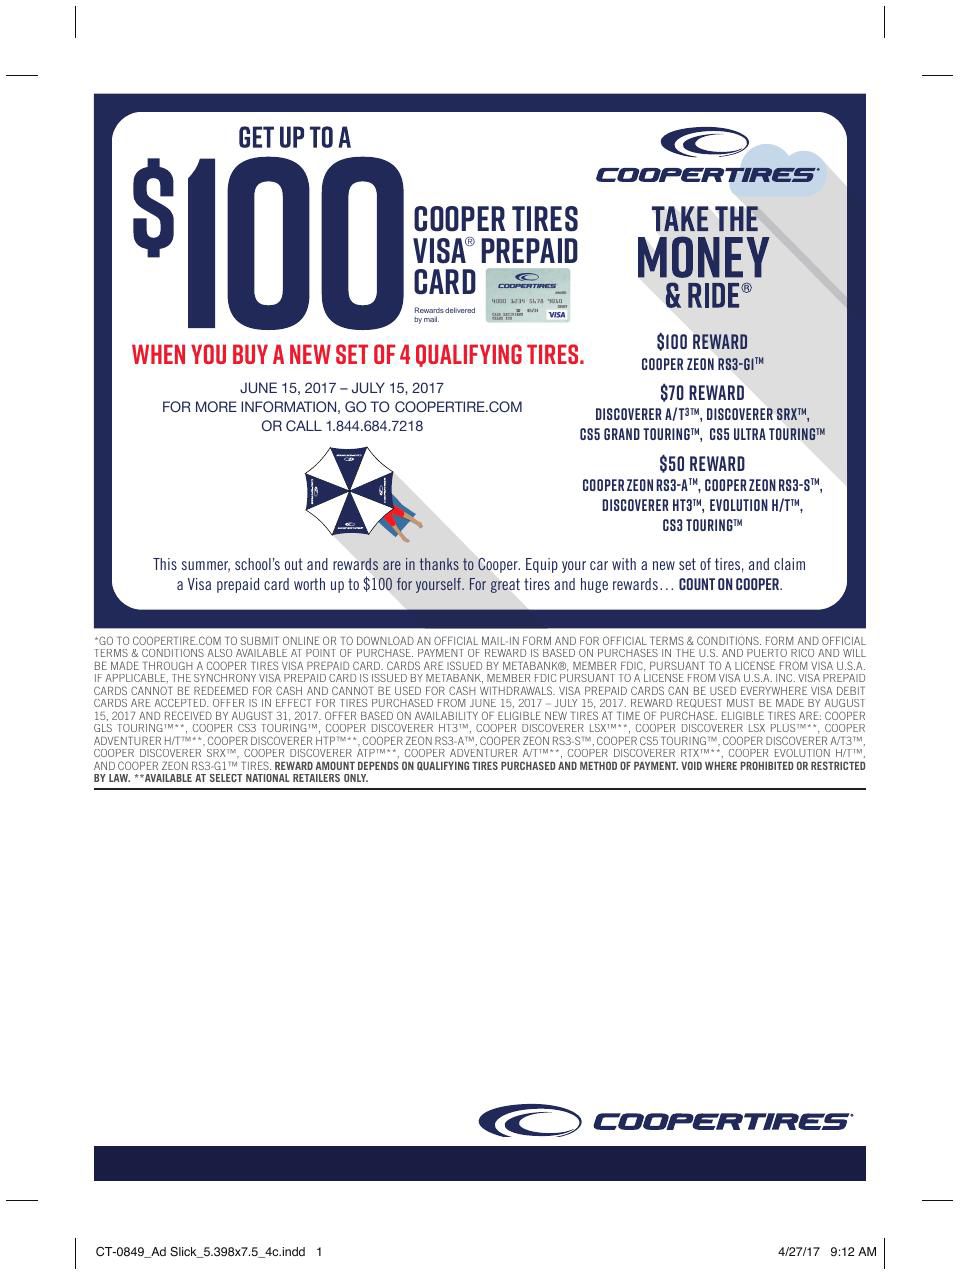 Cooper Tire Dealers To Promote Summer Rebate Tires Advertise 